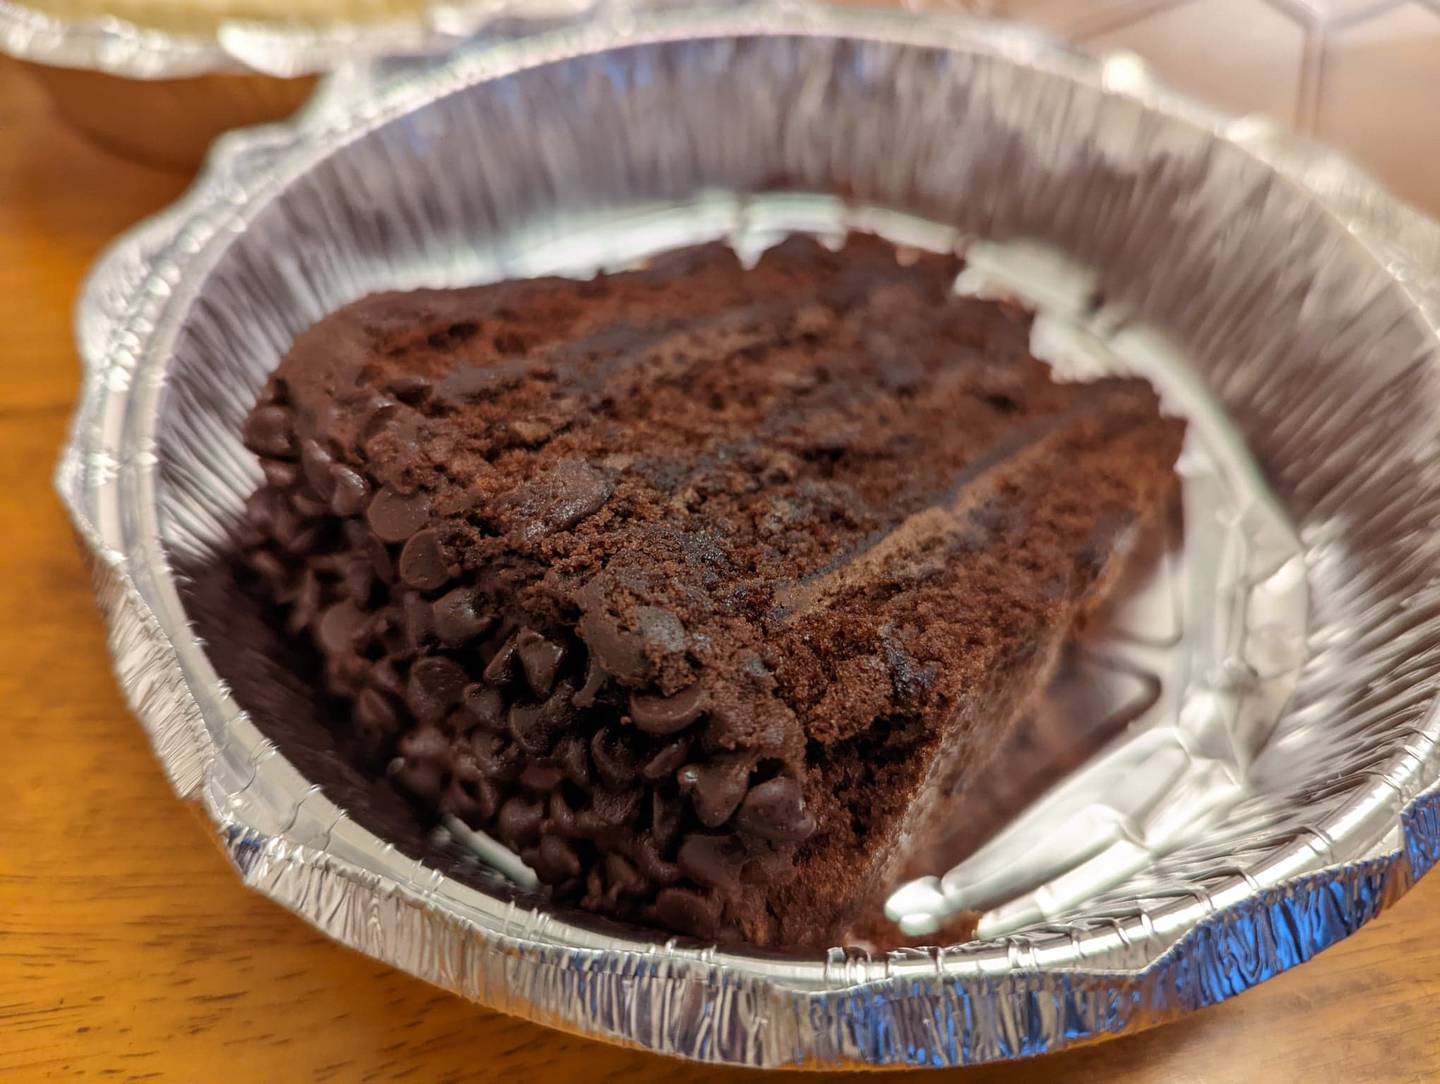 The three-layer chocolate cake from Al's Steak House in Joliet was topped with delicious chocolate frosting and smothered in chocolate chips.